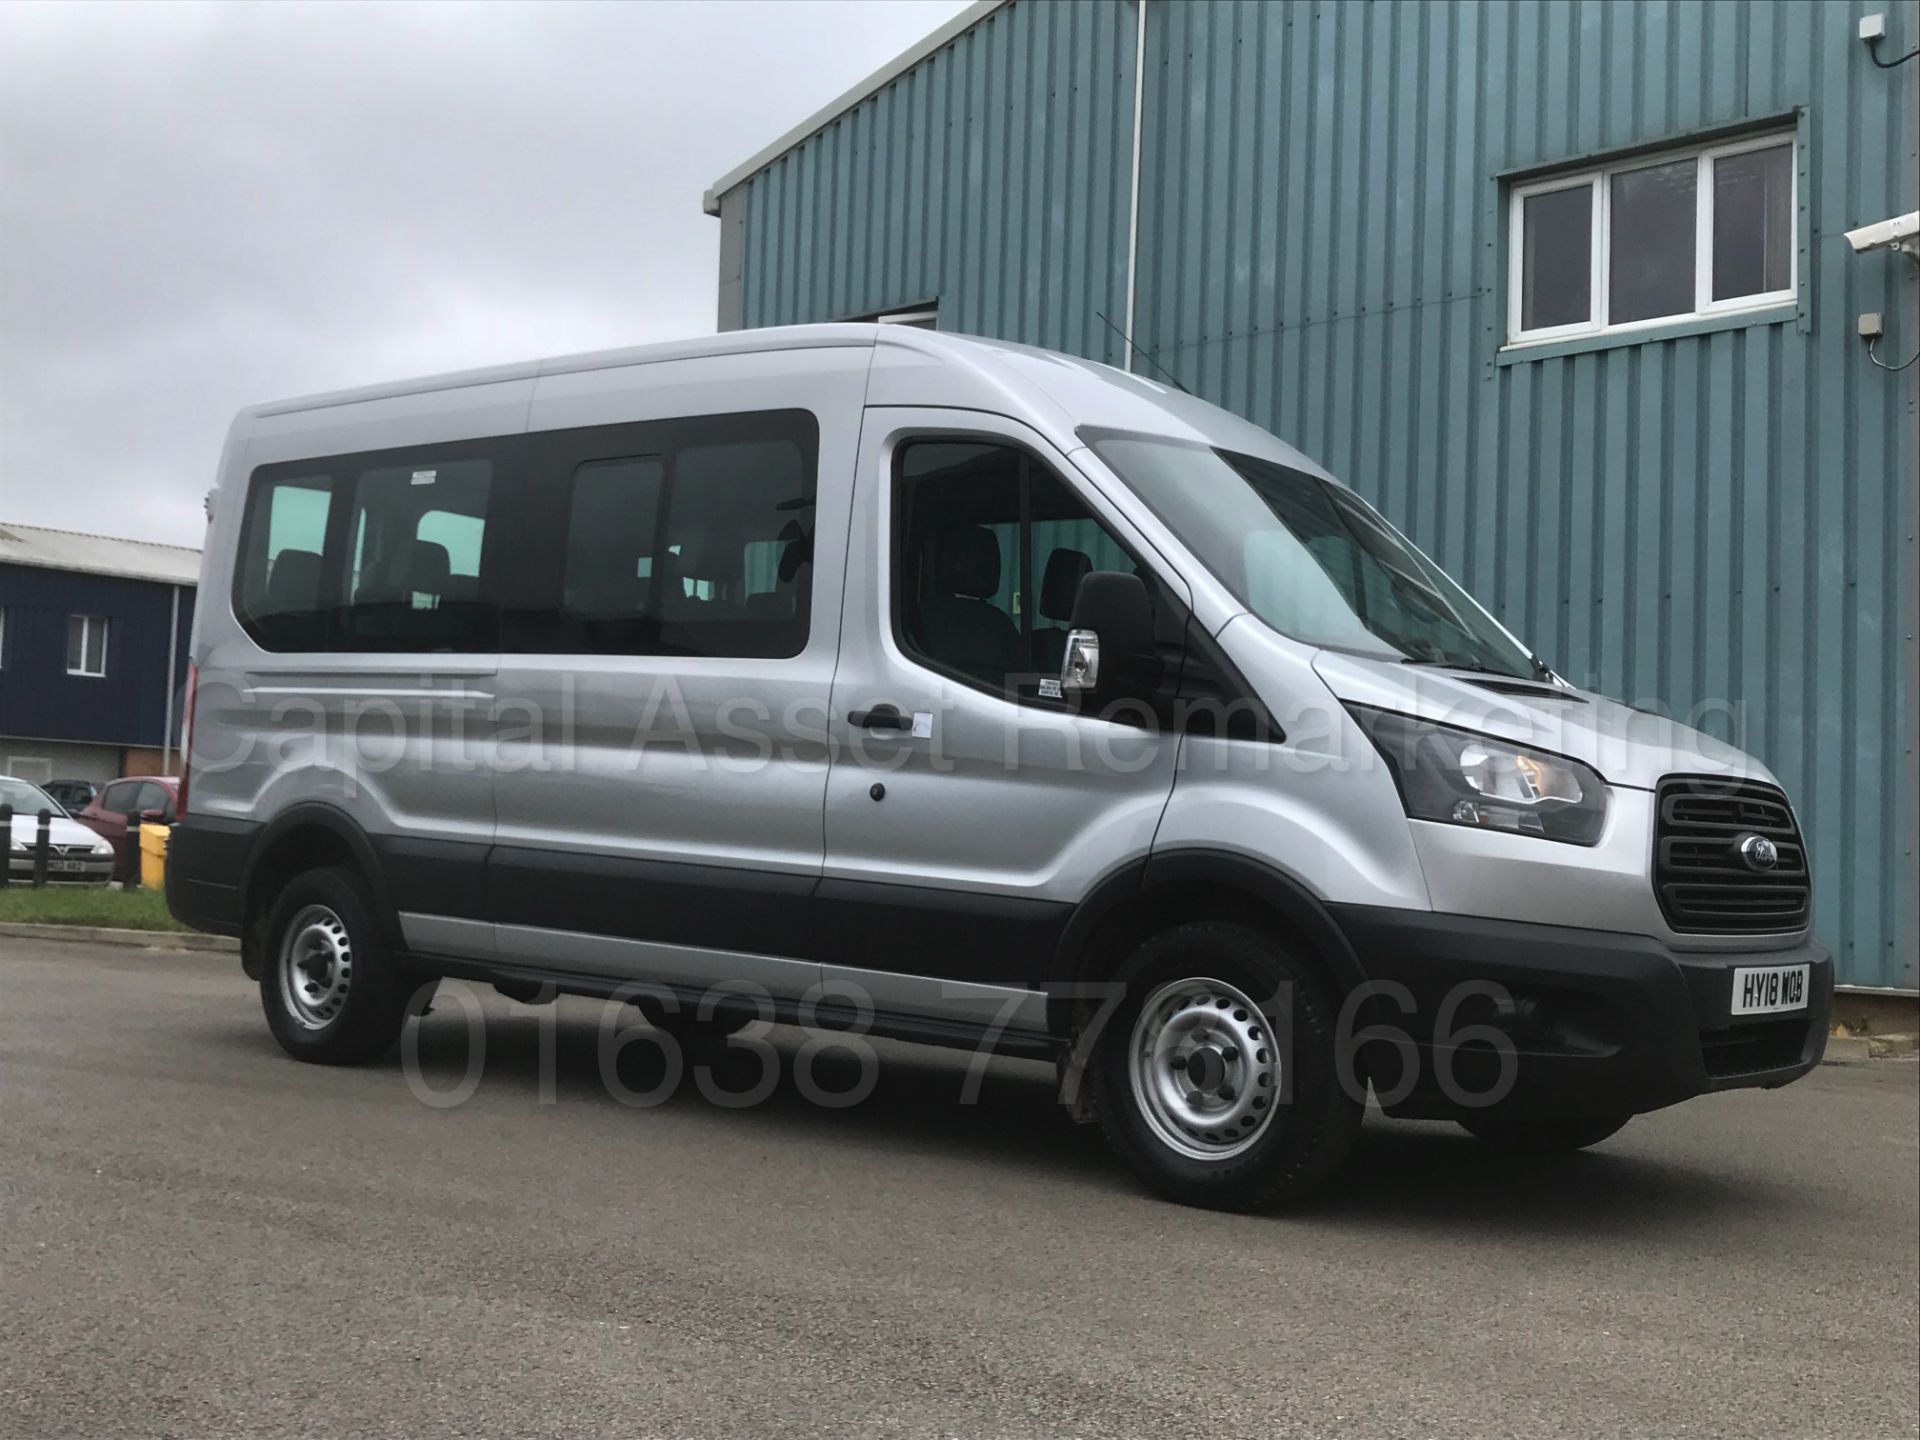 (On Sale) FORD TRANSIT LWB '15 SEATER MINI-BUS' (2018) '2.2 TDCI -125 BHP- 6 SPEED' 130 MILES ONLY ! - Image 17 of 50